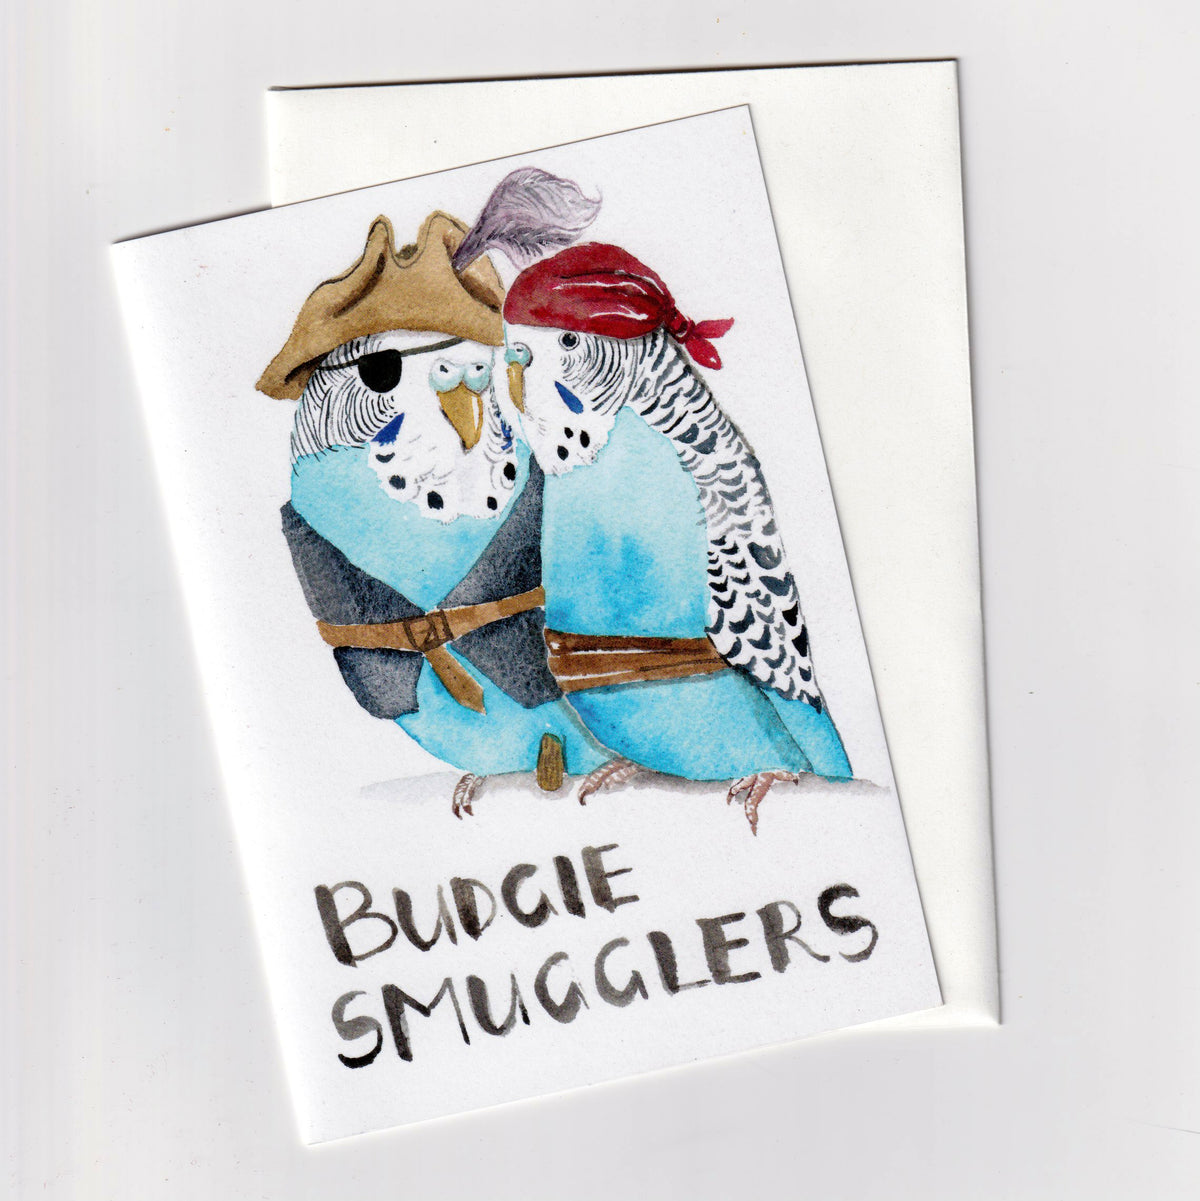 Budgie Smugglers - A6 Greeting Card